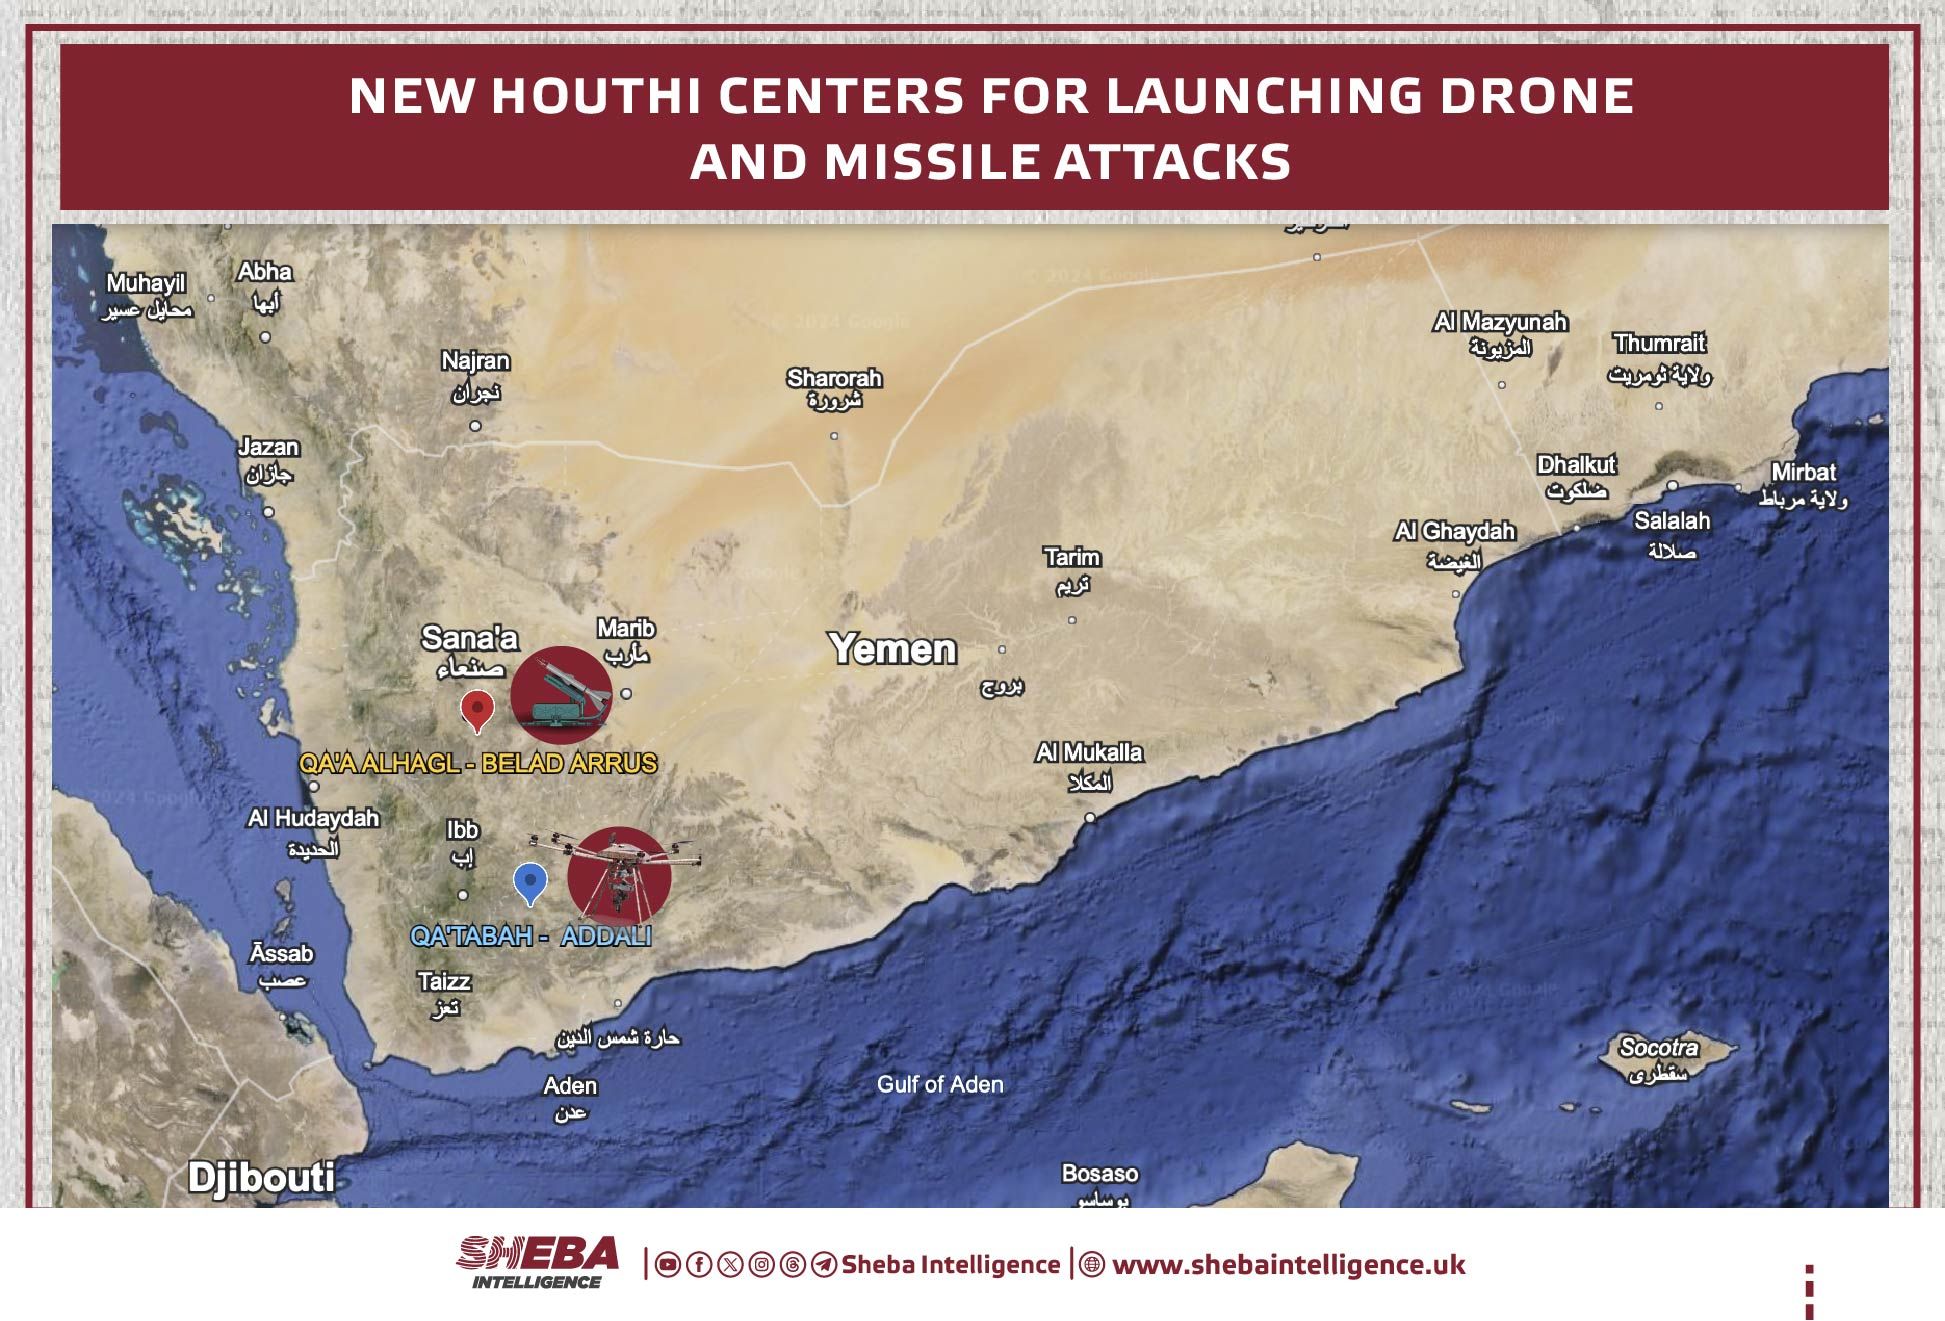 New Houthi Centers for Launching Drone and Missile Attacks